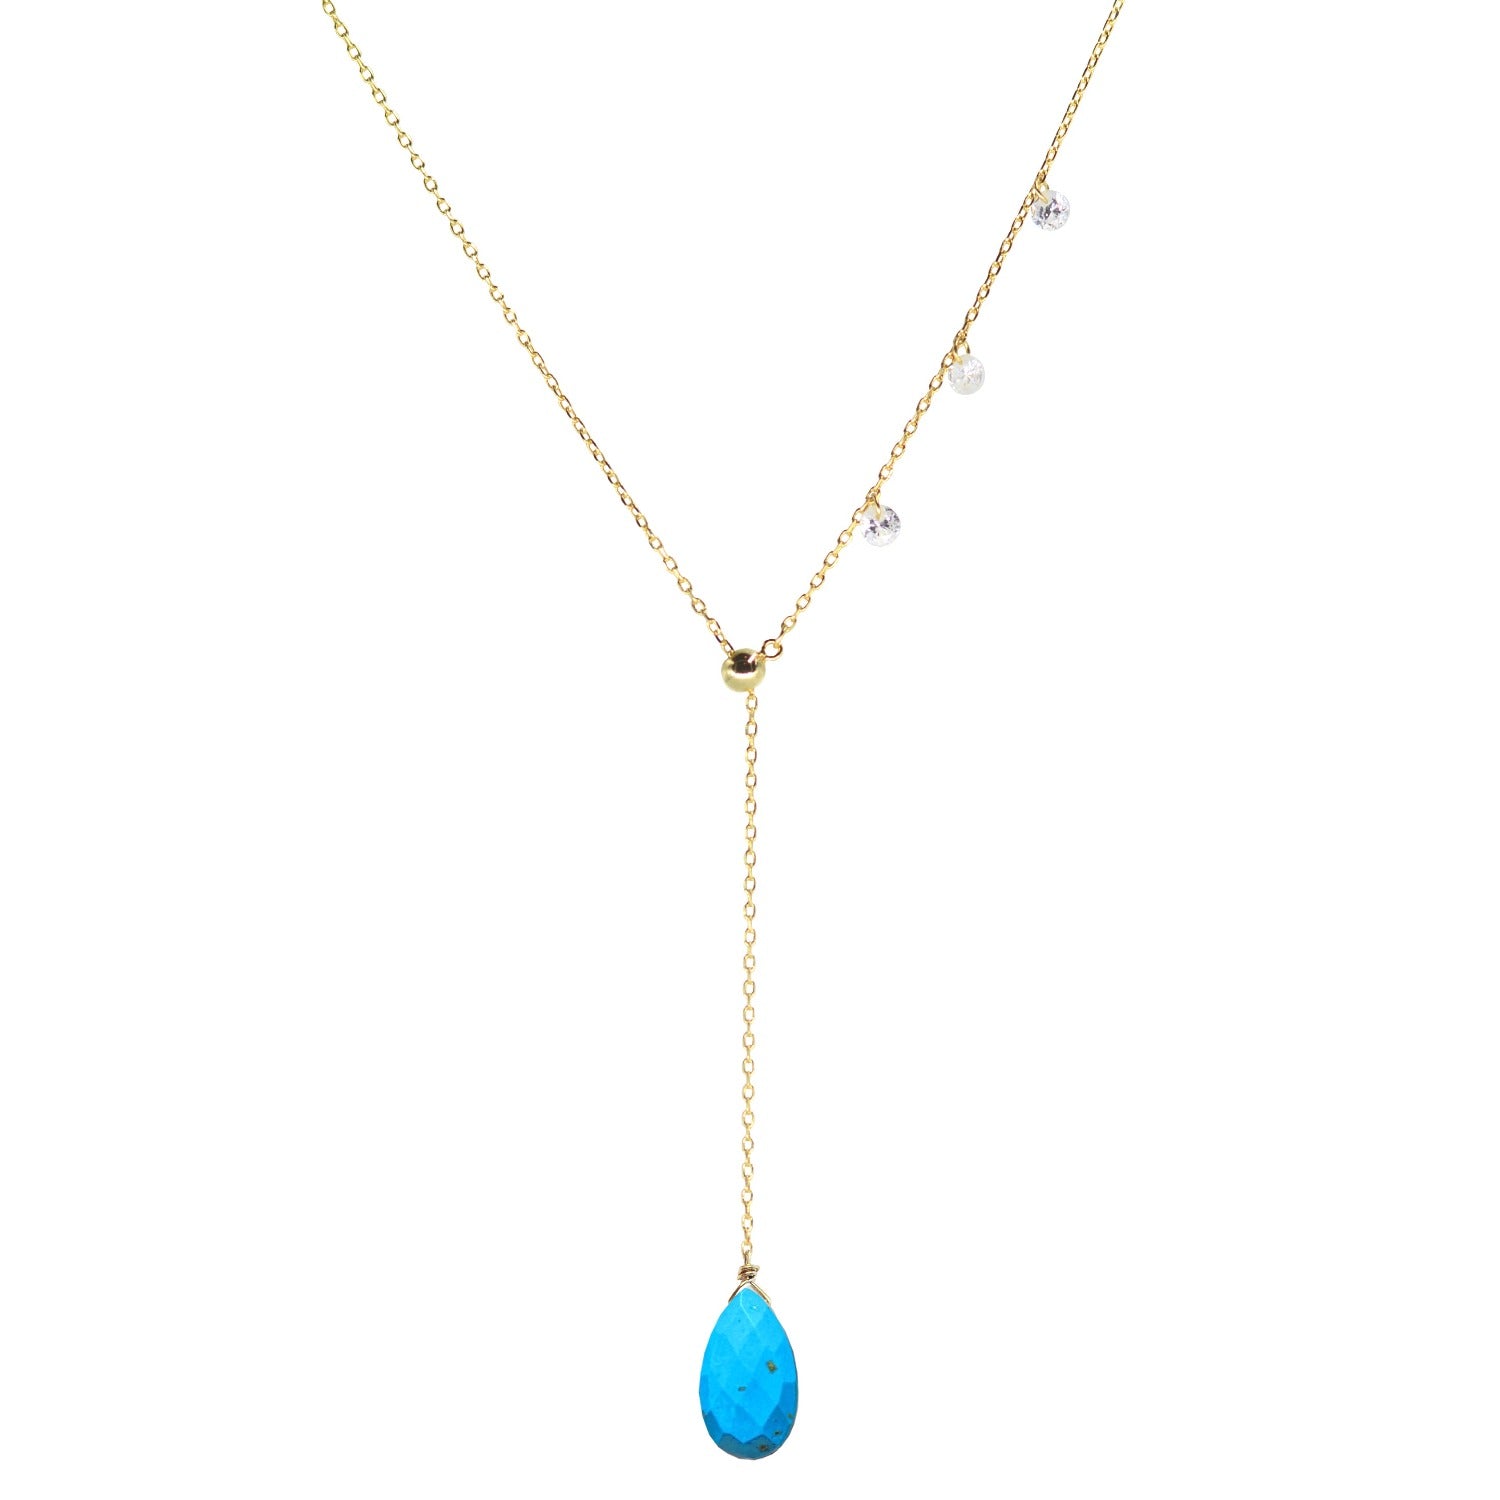 double slider lariat necklace with turquoise drop